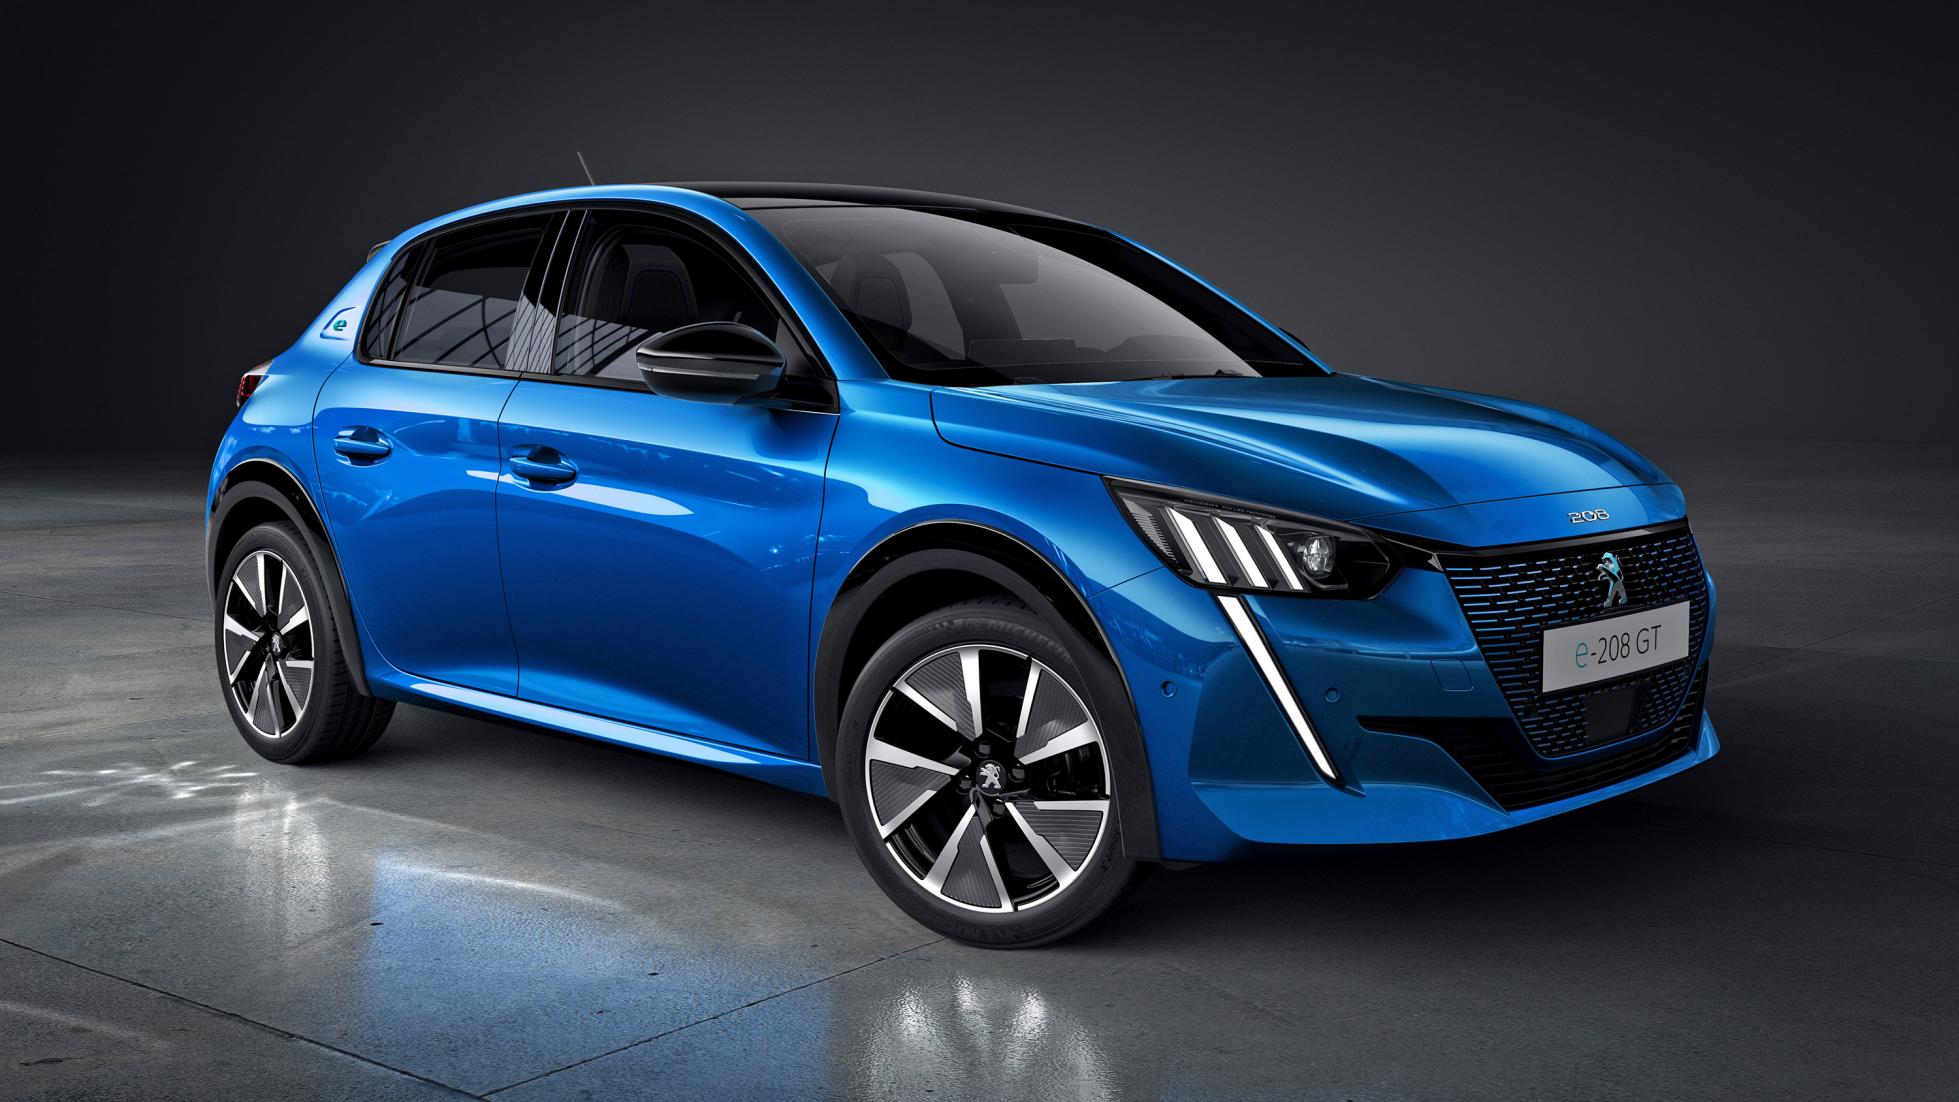 TopGear The quickest version of Peugeot's new 208 is electric